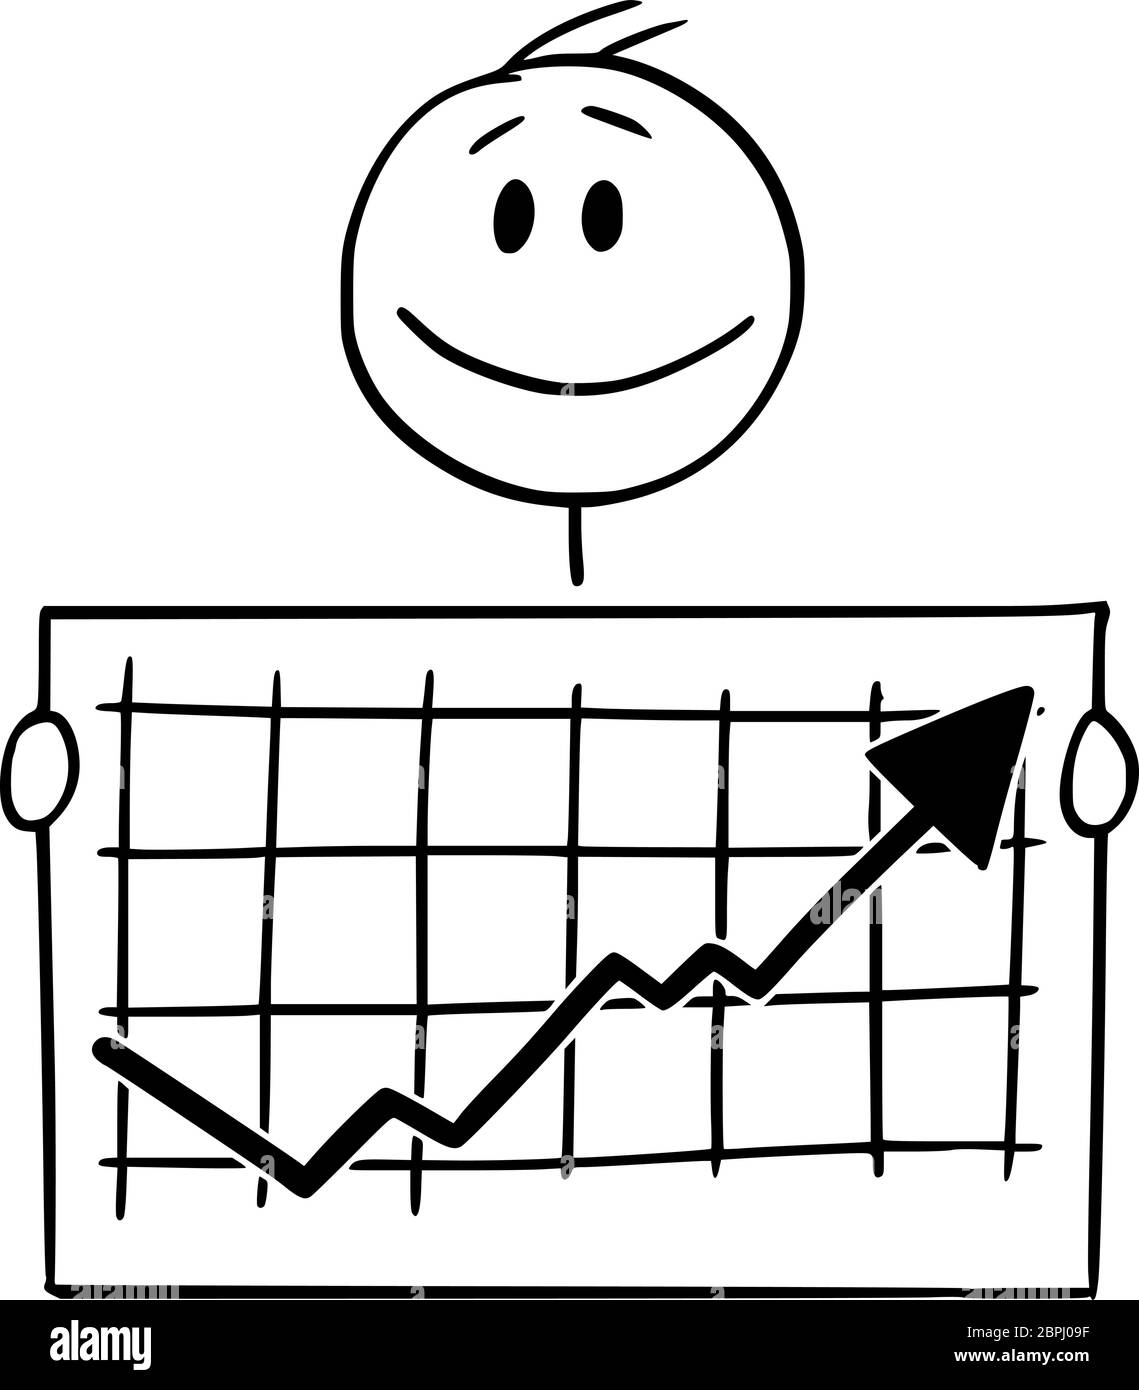 Vector cartoon stick figure drawing conceptual illustration of happy smiling man or businessman holding growing or rising financial chart or graph. Stock Vector